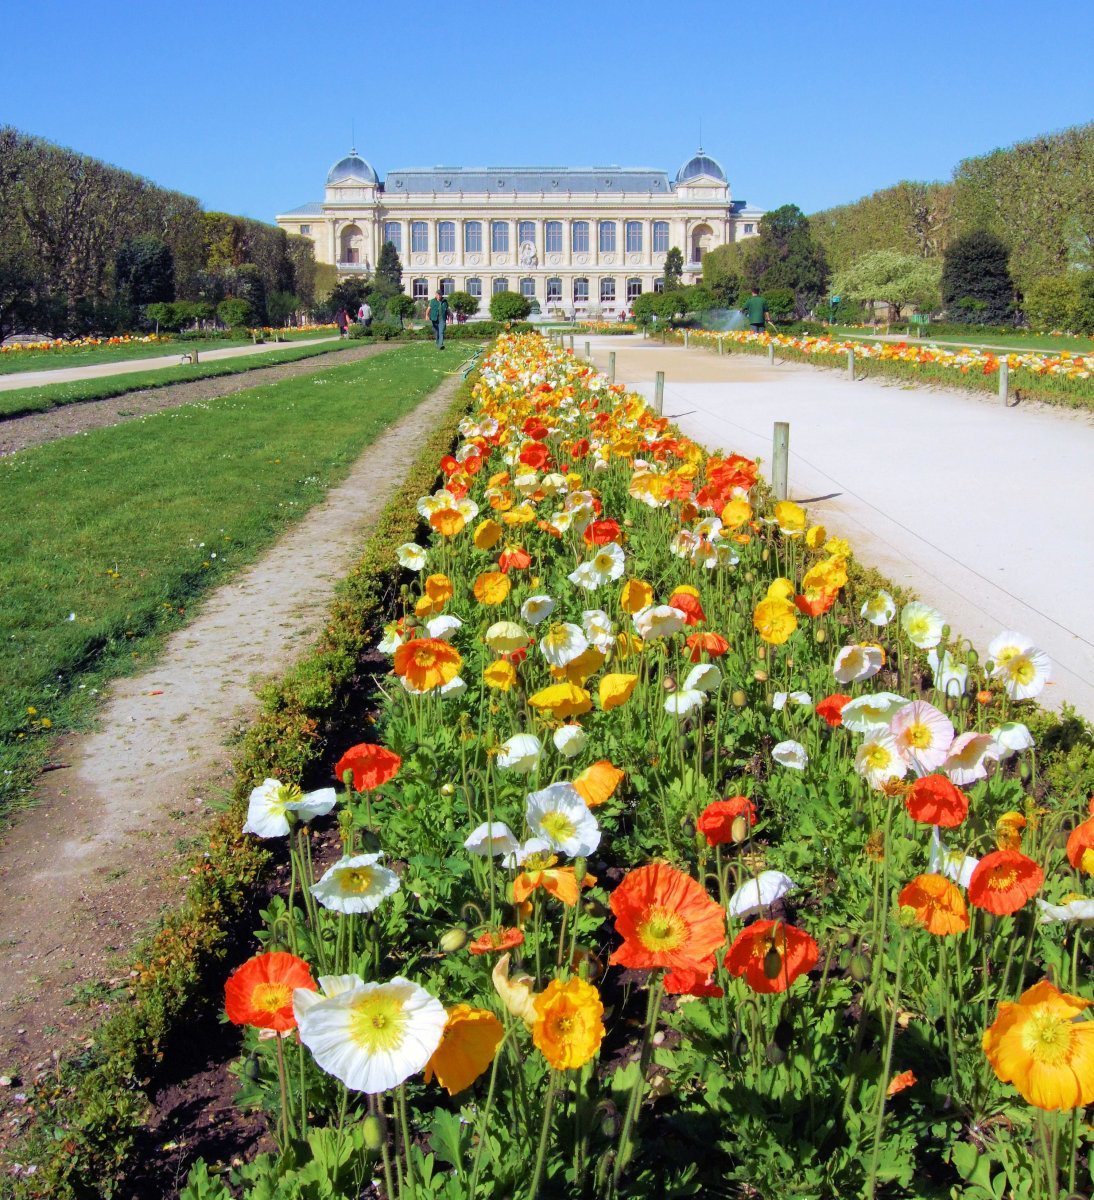 Learn and play at the Jardin des Plantes in Paris